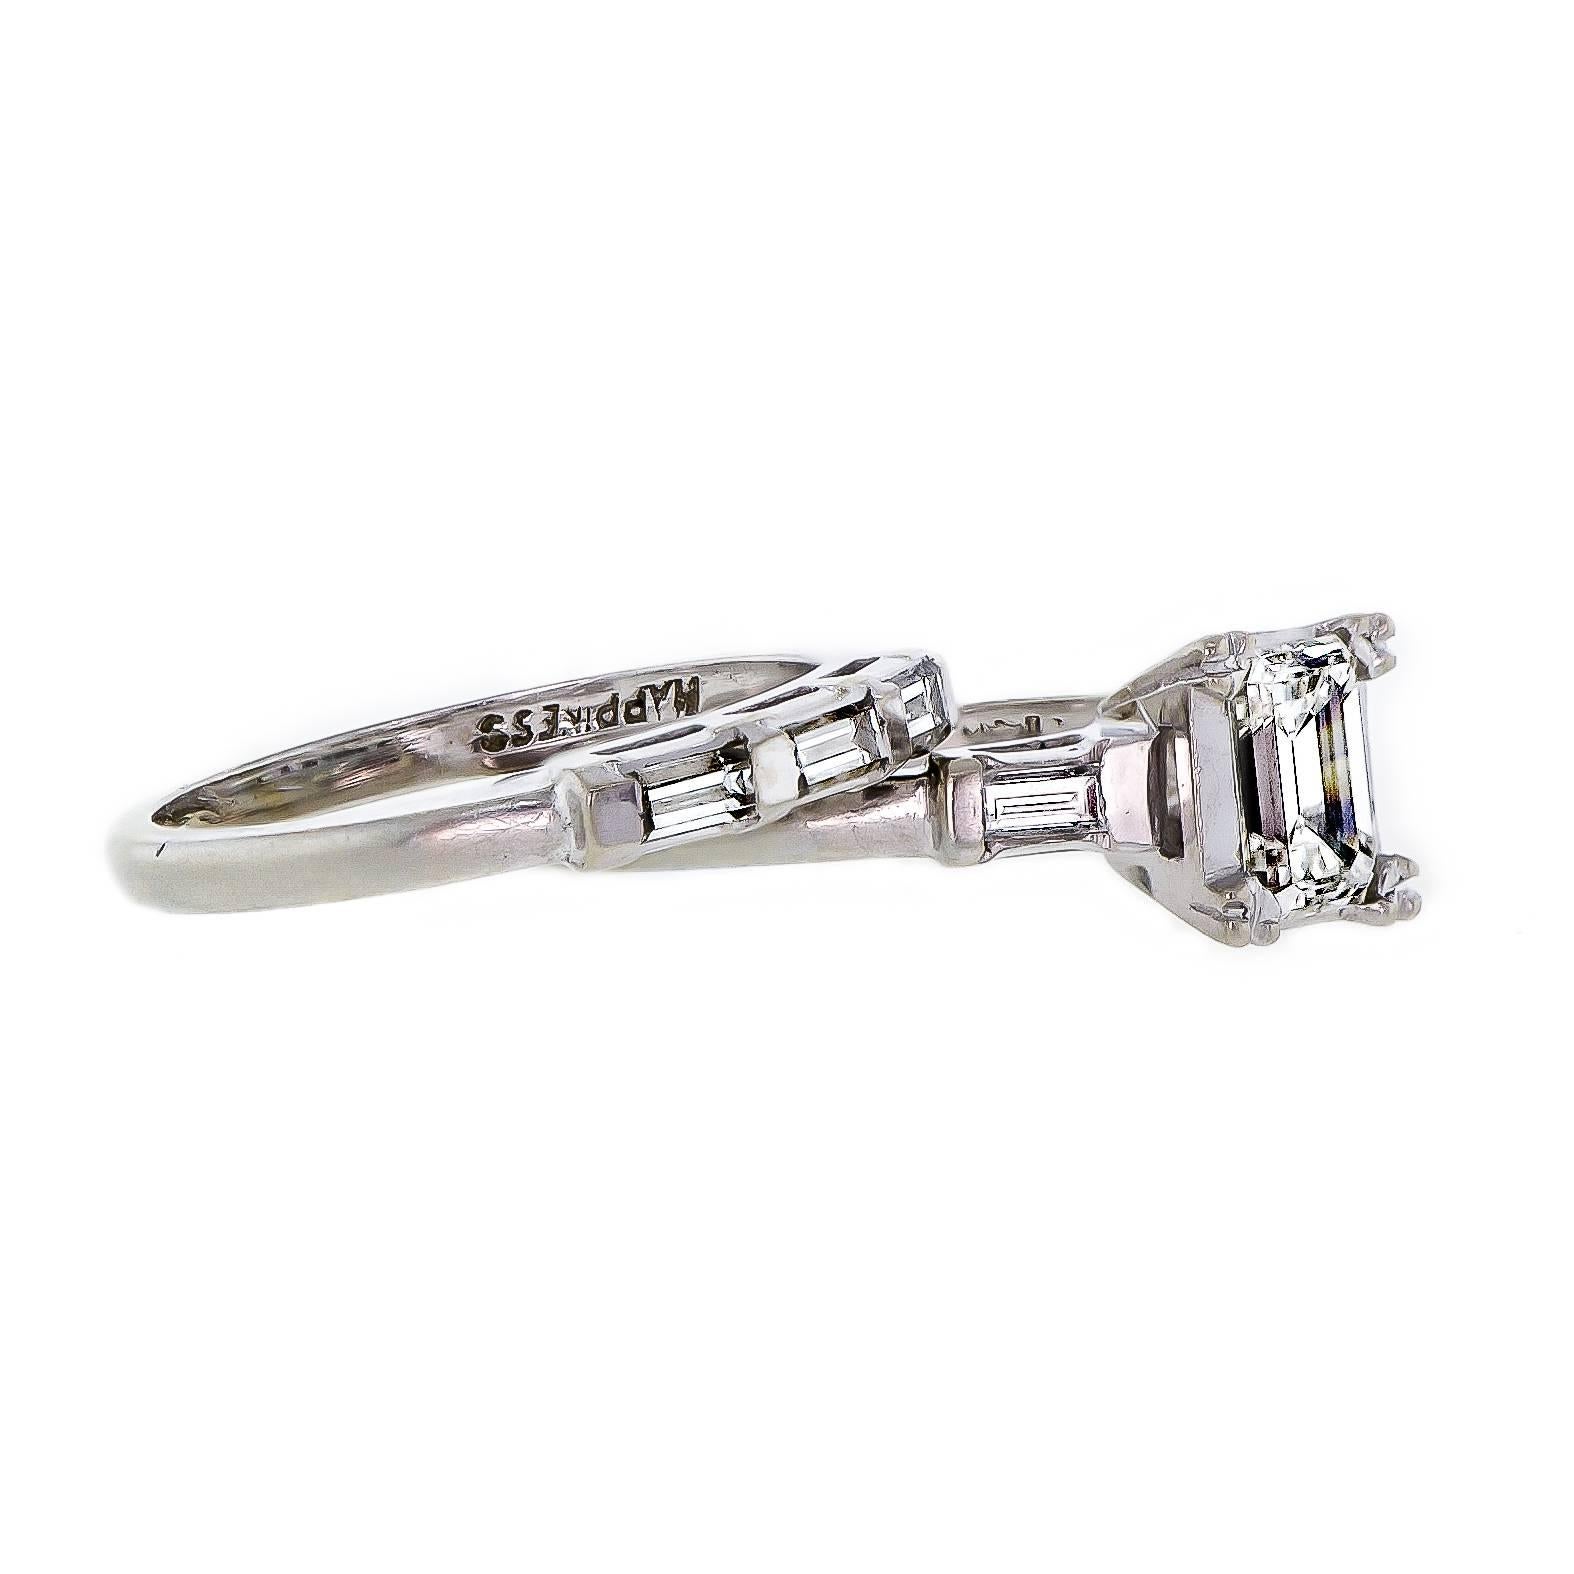 Vintage diamond and 14k white gold lady's engagement ring and wedding band - set with one illusion set emerald cut diamond approx .80 ct. VS1 Clarity -  HIJ color and five channel set baguette cut diamonds approximate total weight .50 cts. VS-1 VS-2